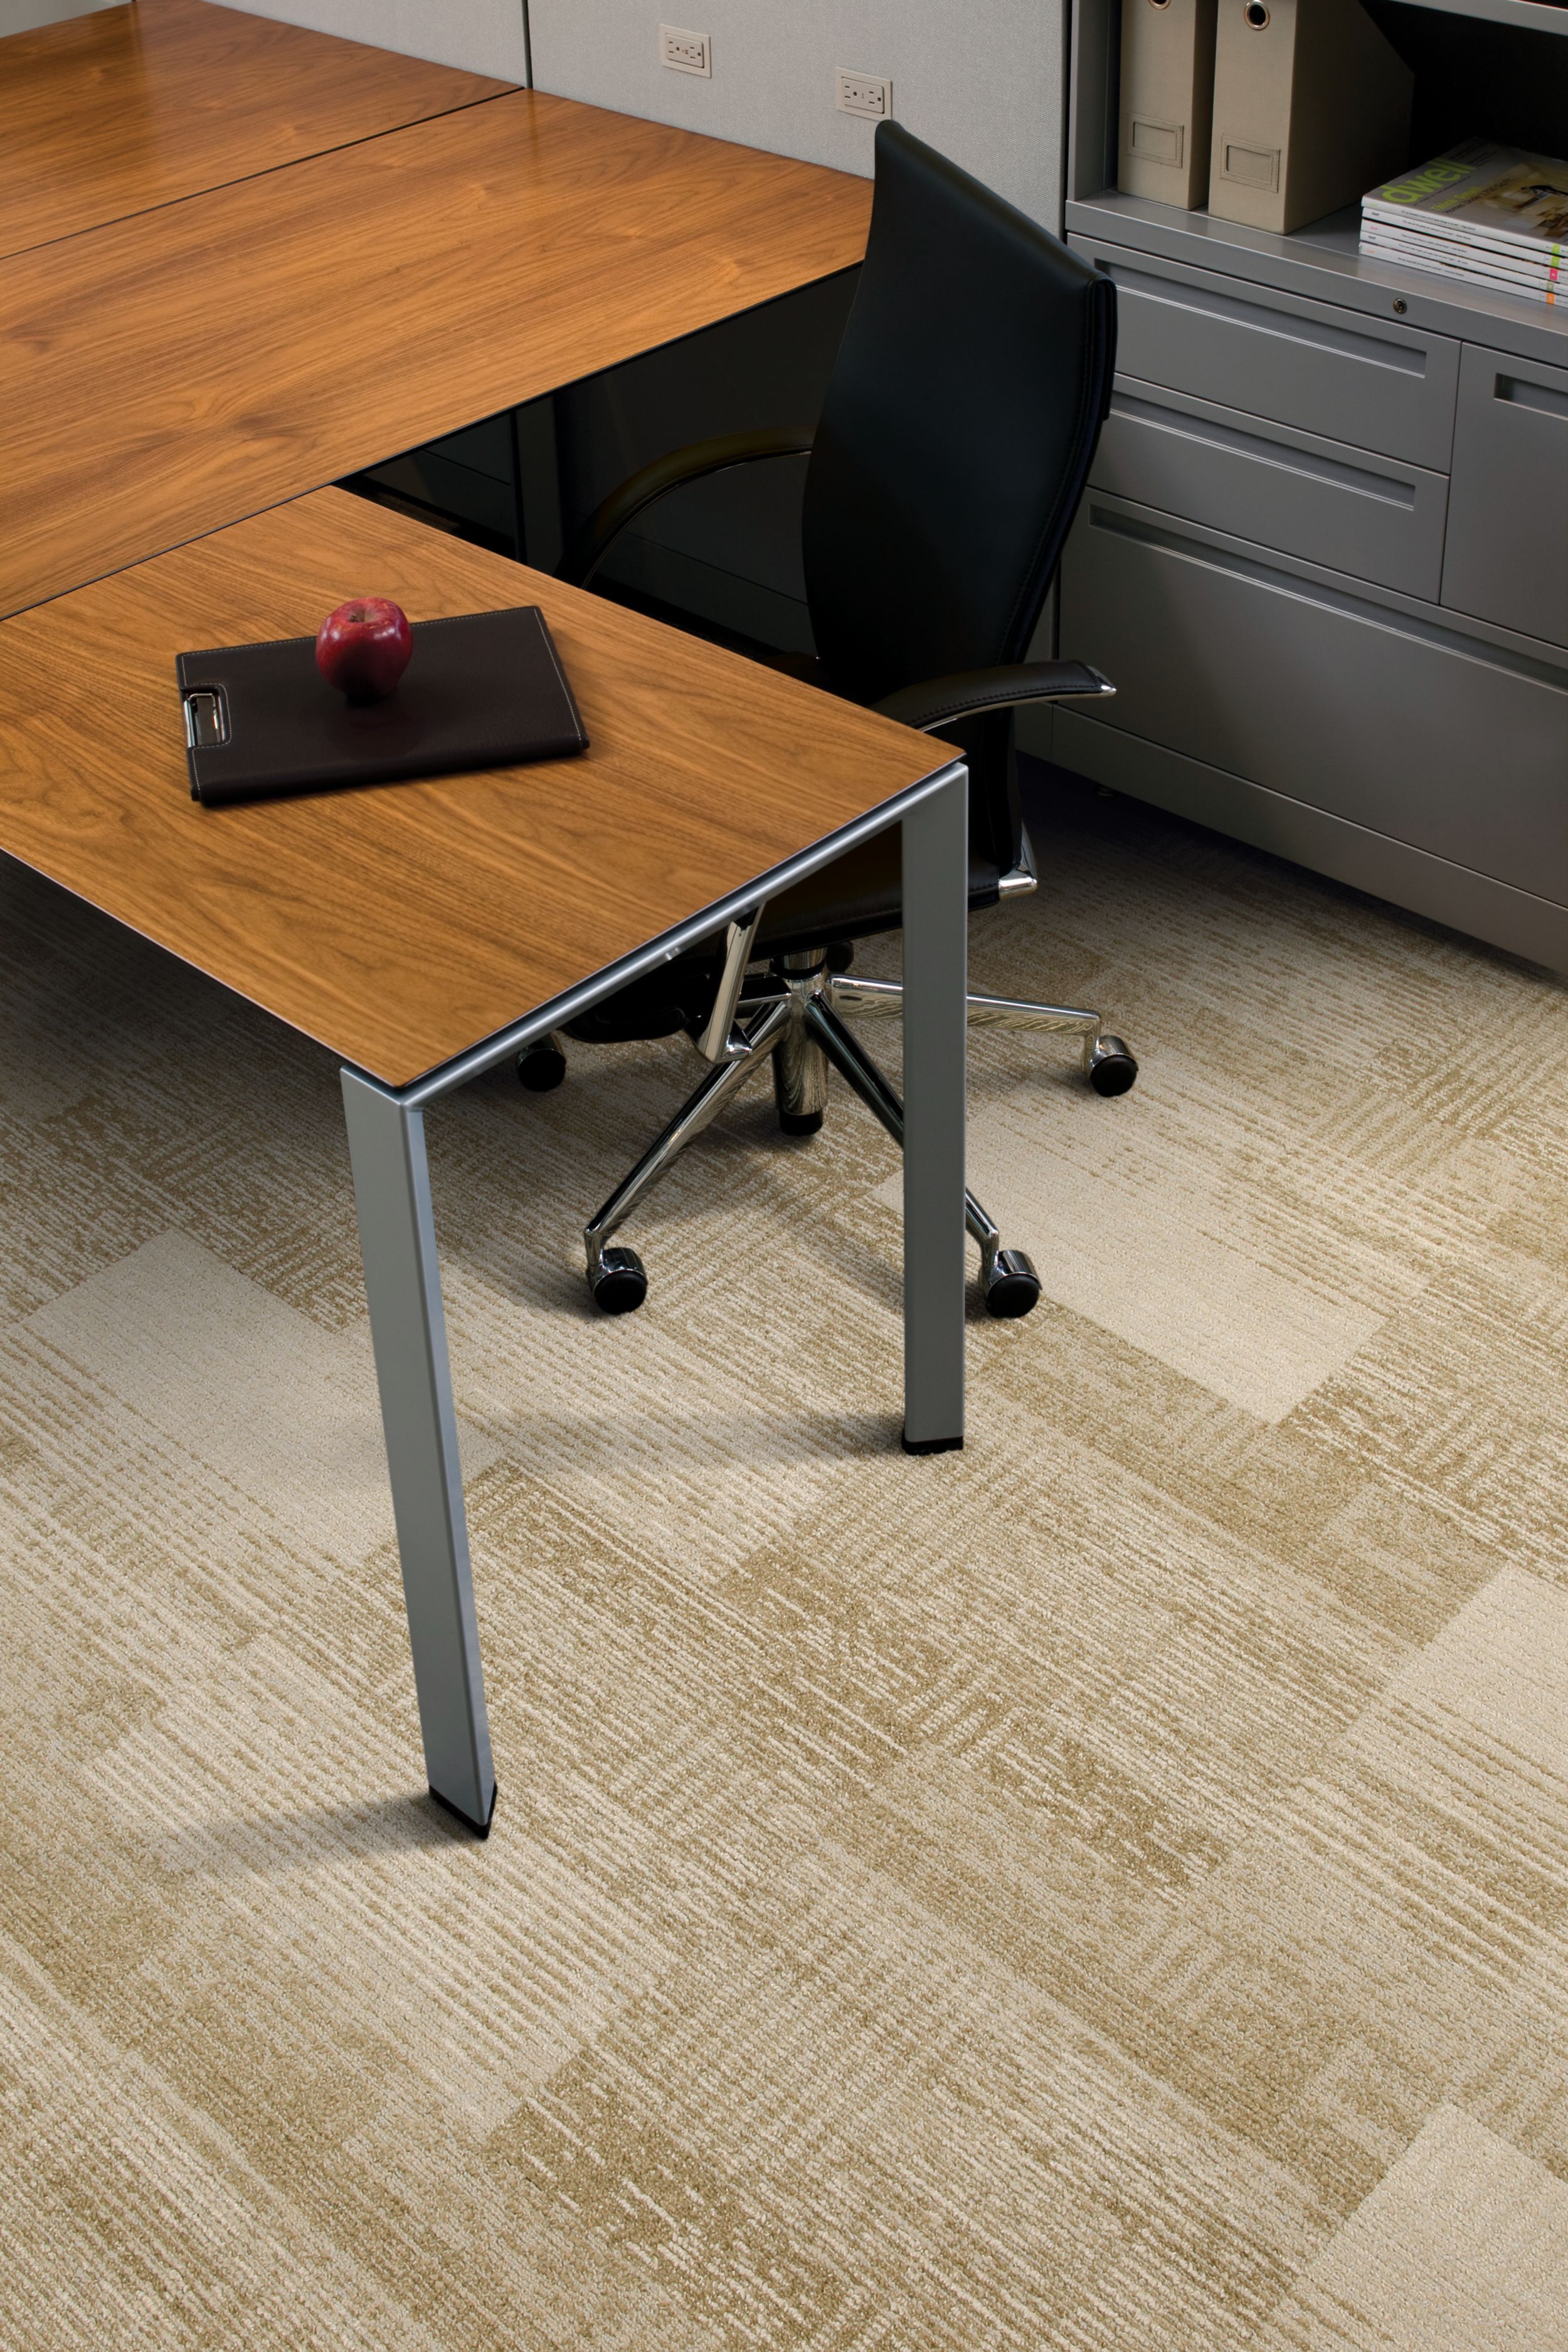 Interface Plain Weave carpet tile in small work area with desk, chair, and cabinets numéro d’image 8